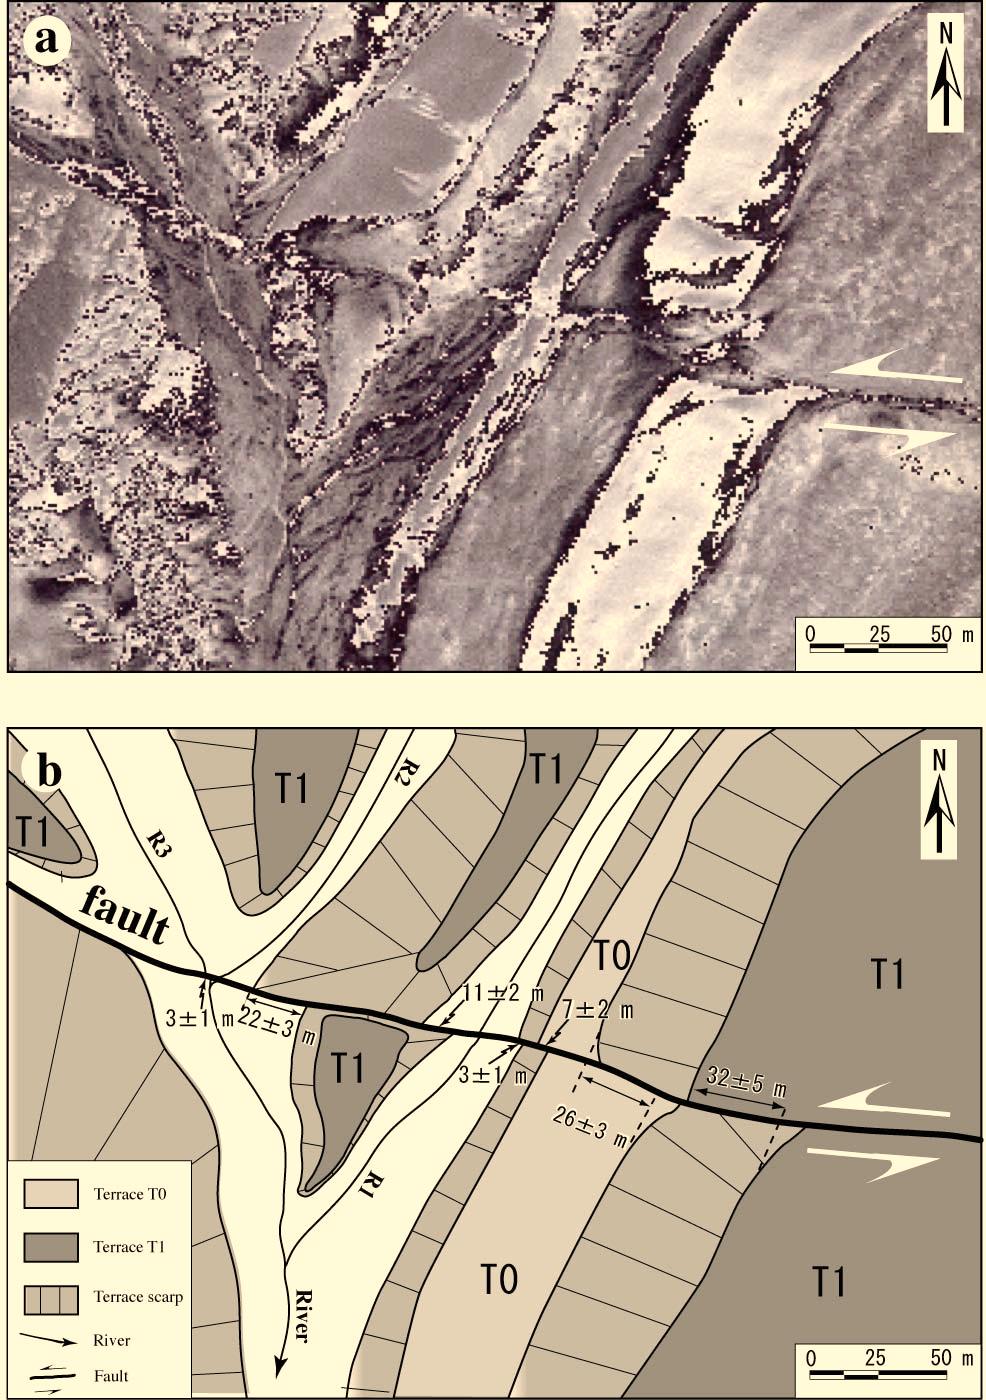 4 The Open Geology Journal, 2008, Volume 2 Aiming Lin Fig. (3). (a) Close-up view of IKONOS image shown in Fig. (2a) and (b) corresponding sketch.